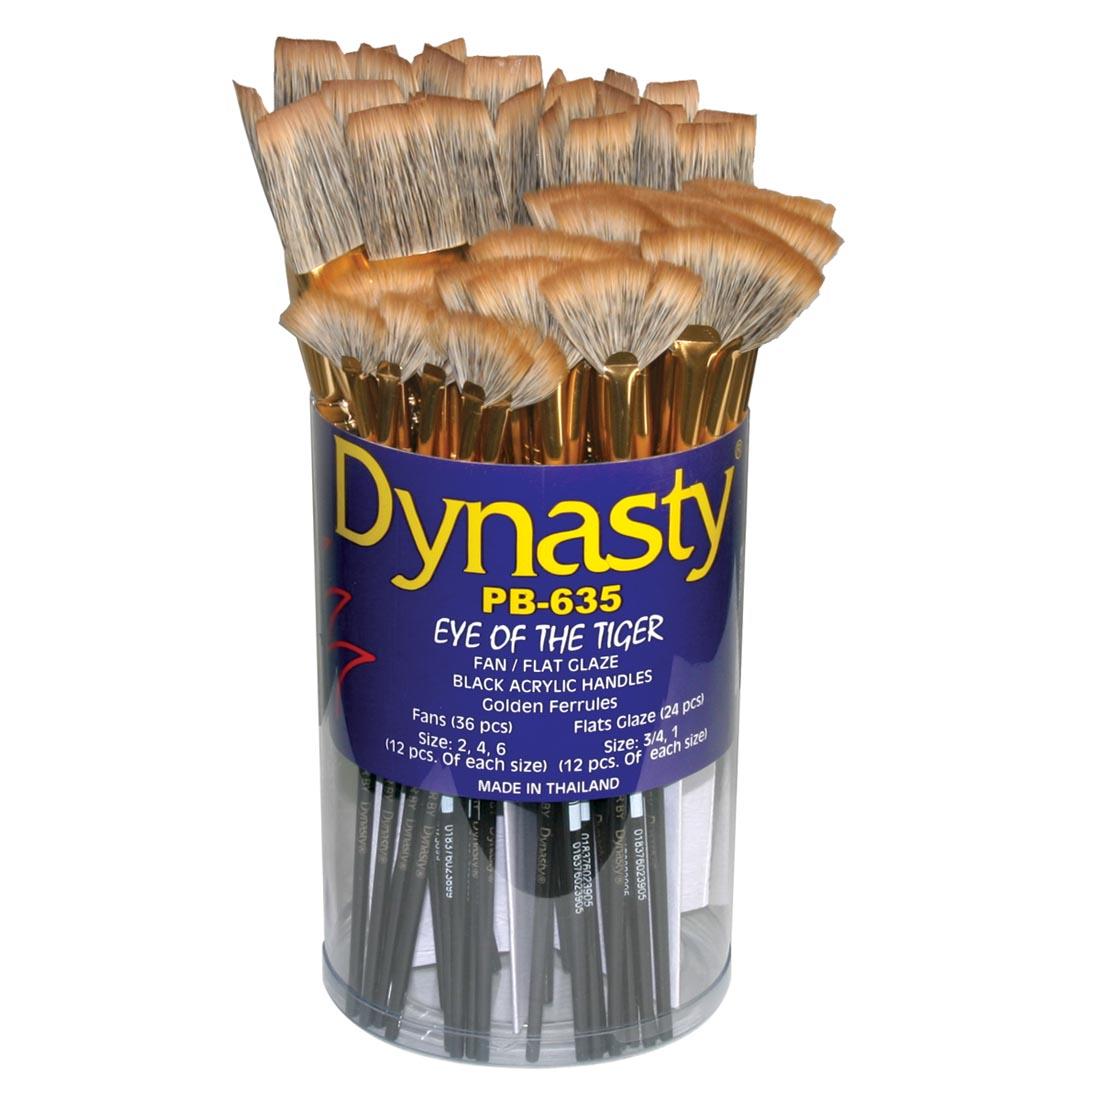 Dynasty Eye of The Tiger Flat and Fan Brush Assortment in a Tub